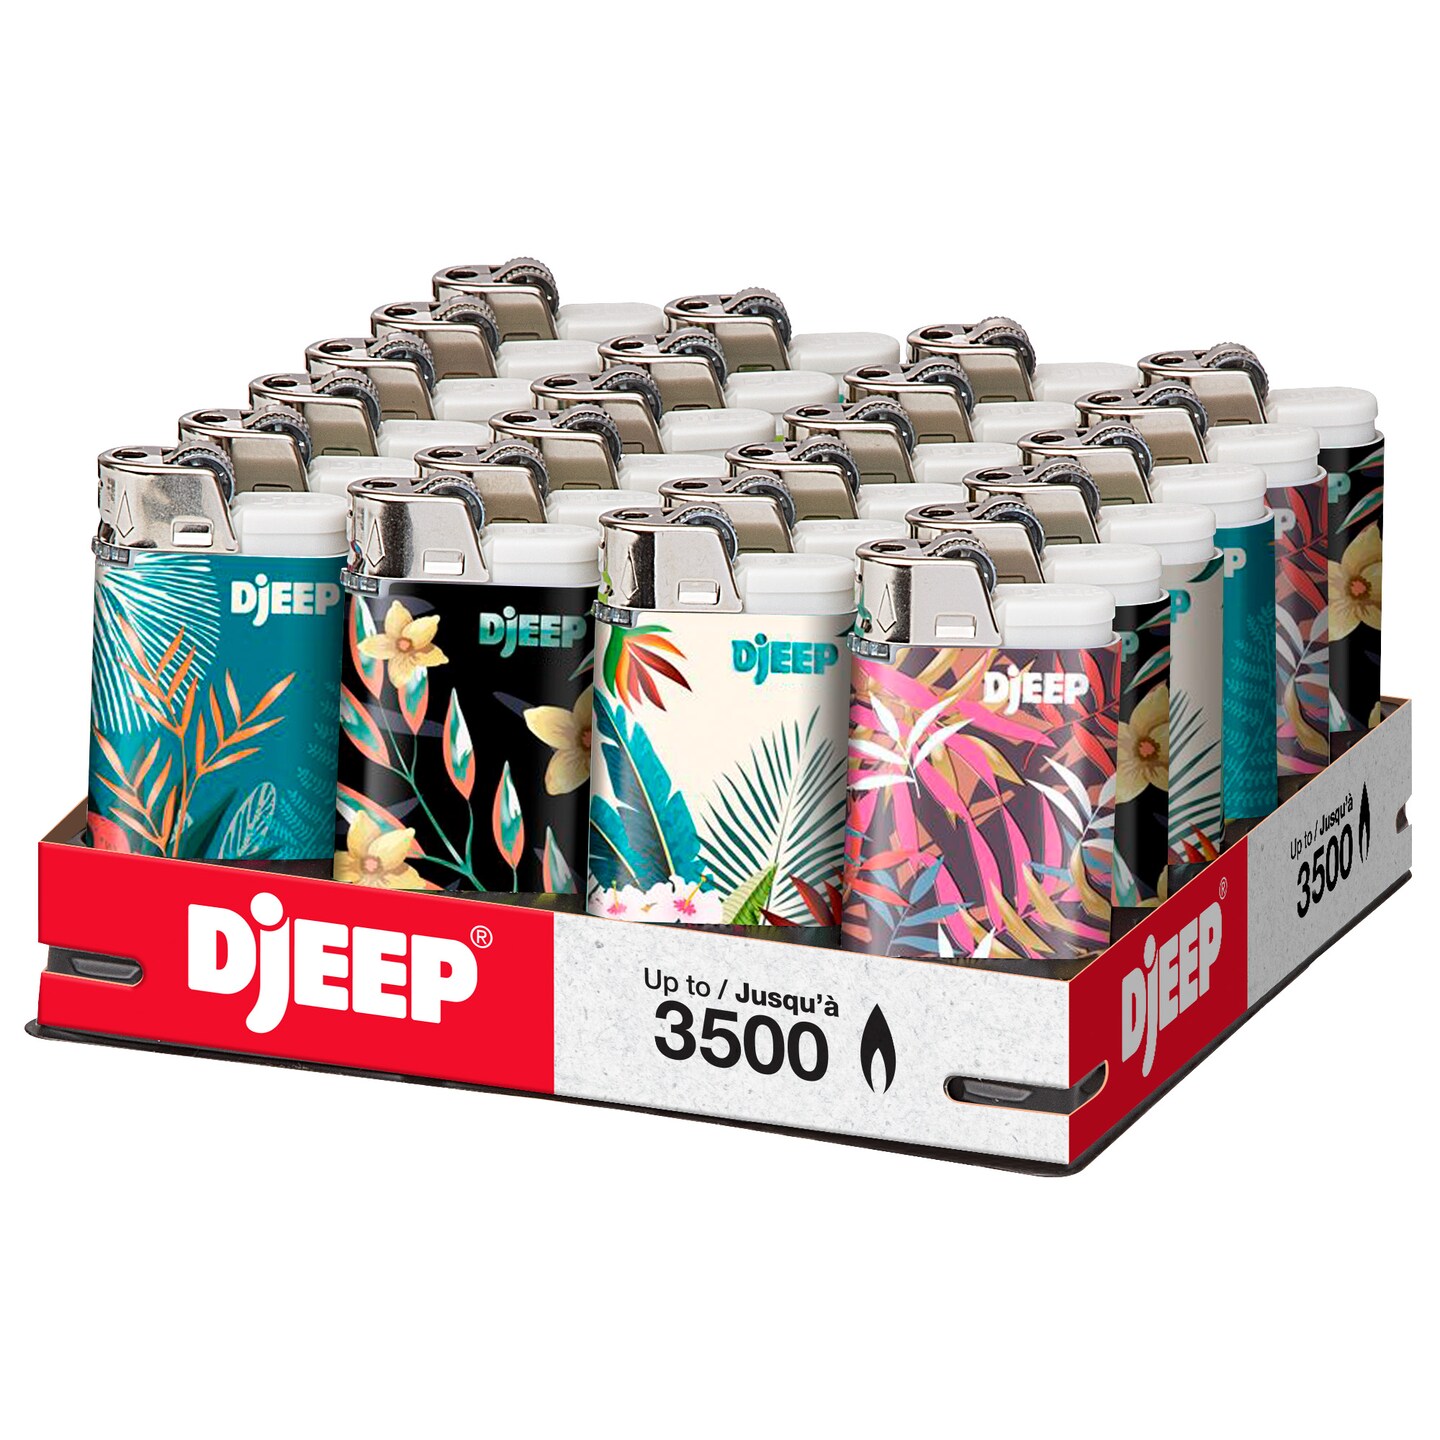 DJEEP Pocket Lighters, VIBRANT Collection Textured Metallic, Colorful Unique Lighters, Disposable Lighters